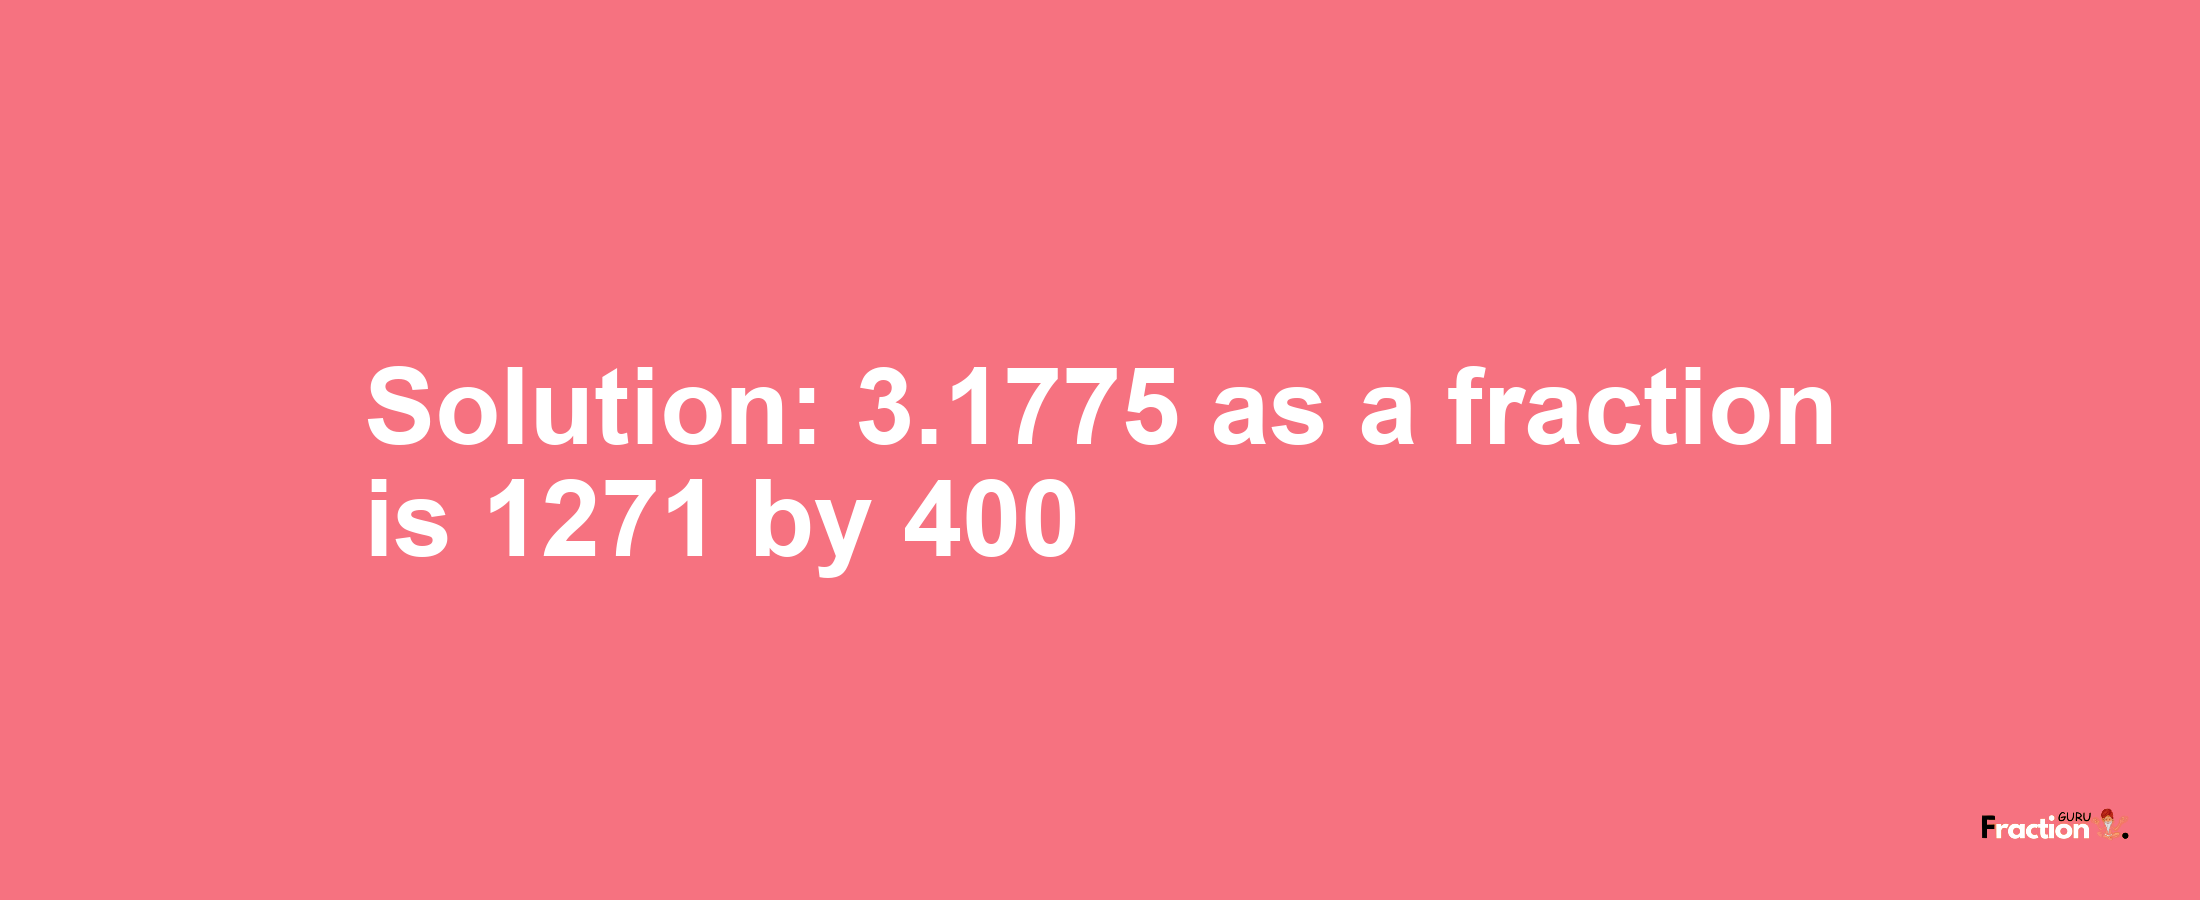 Solution:3.1775 as a fraction is 1271/400